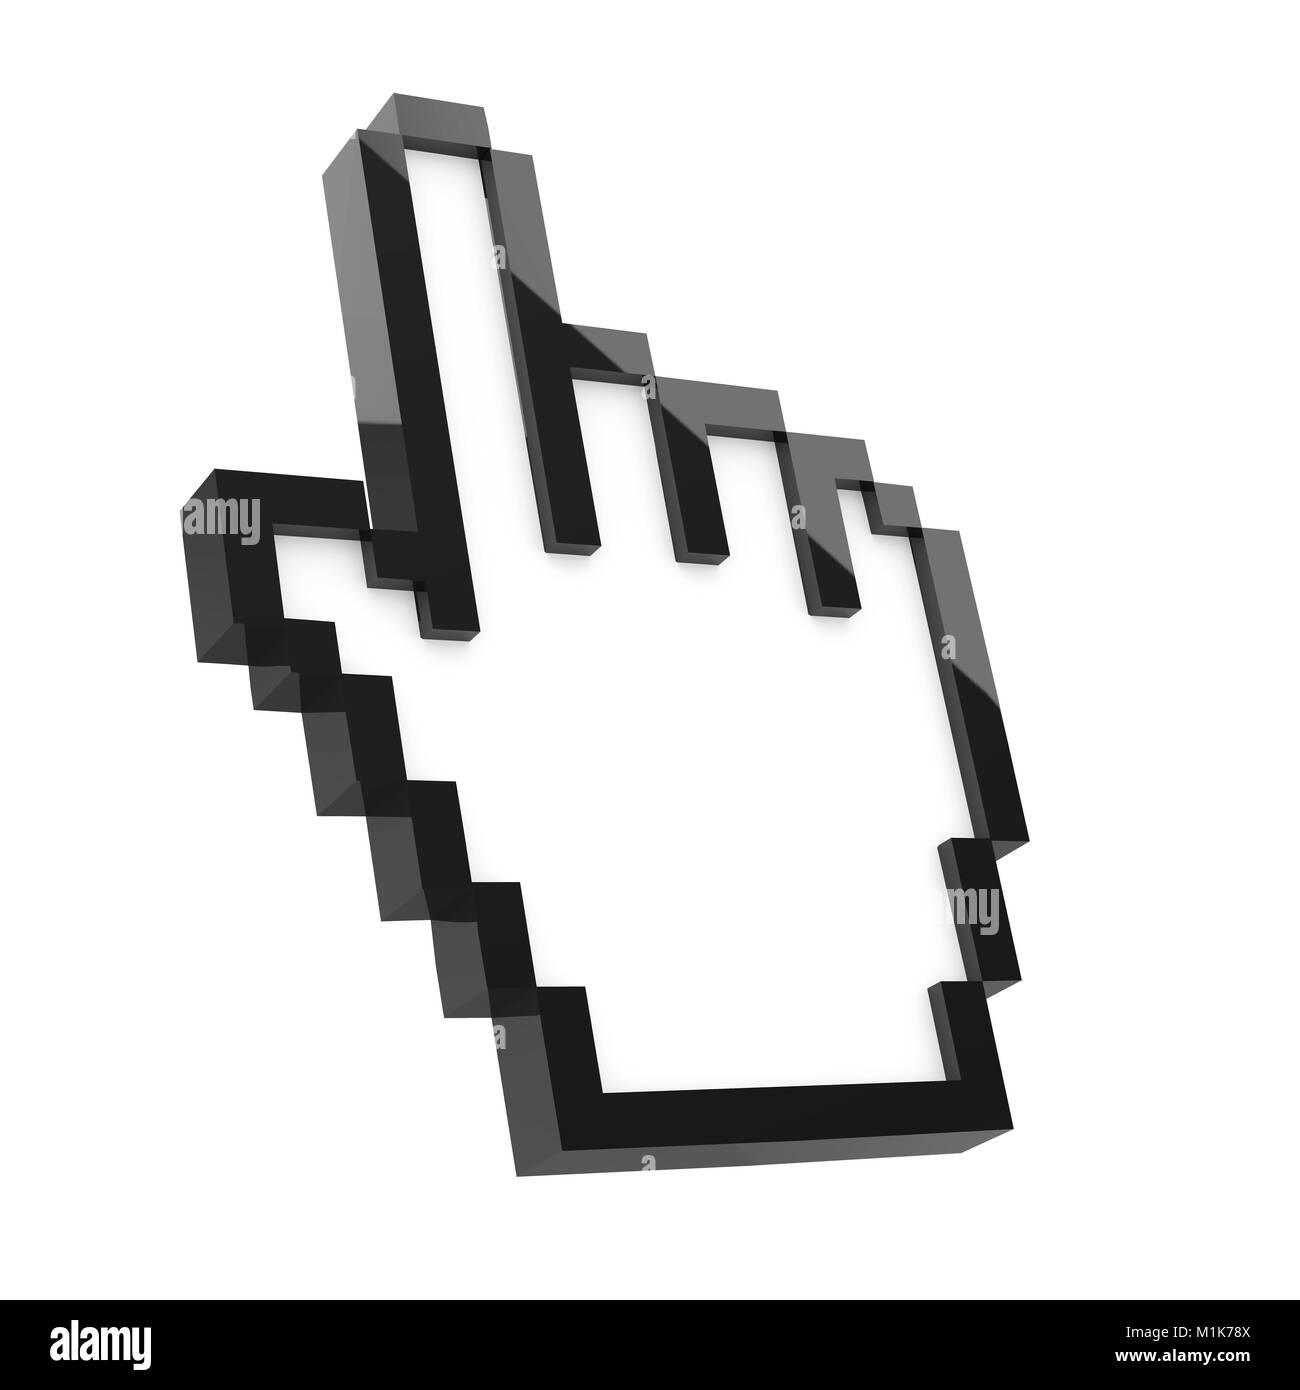 mouse cursor hand png